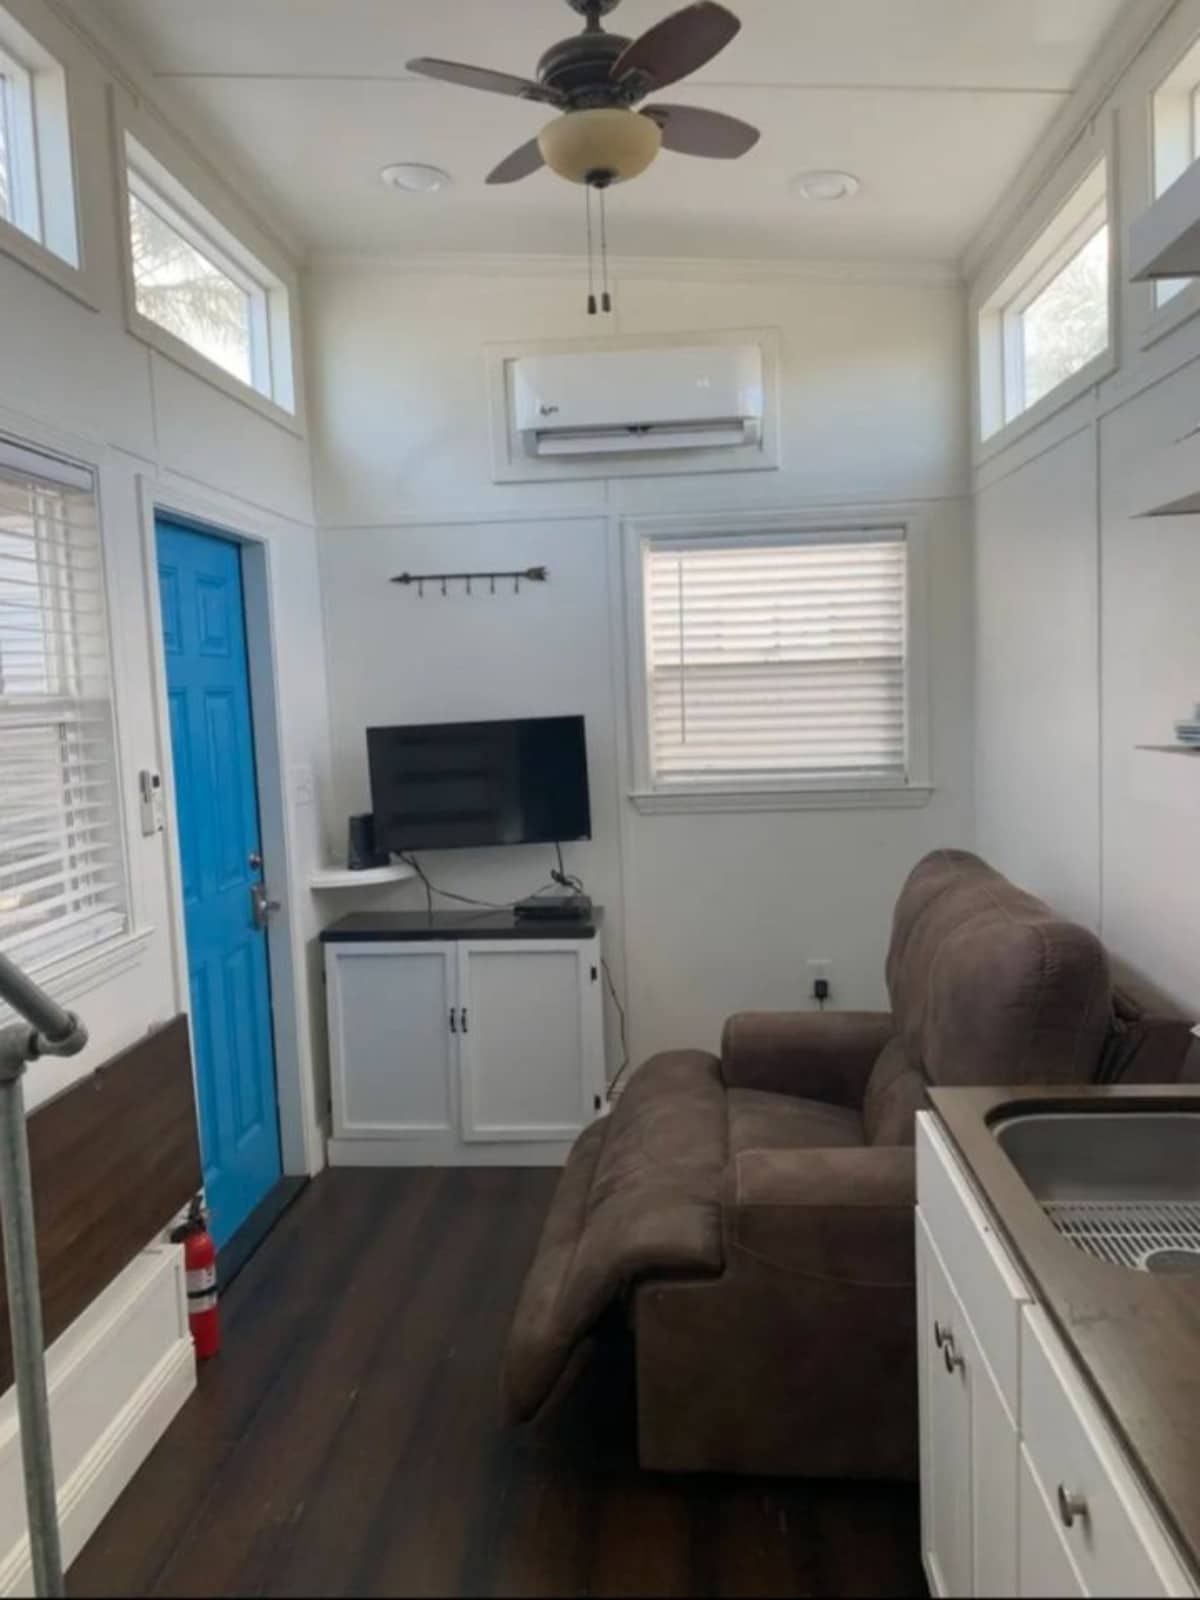 Living area of 22' Custom Tiny House has a recliner and wall mounted television set along with some storage and an air condition unit